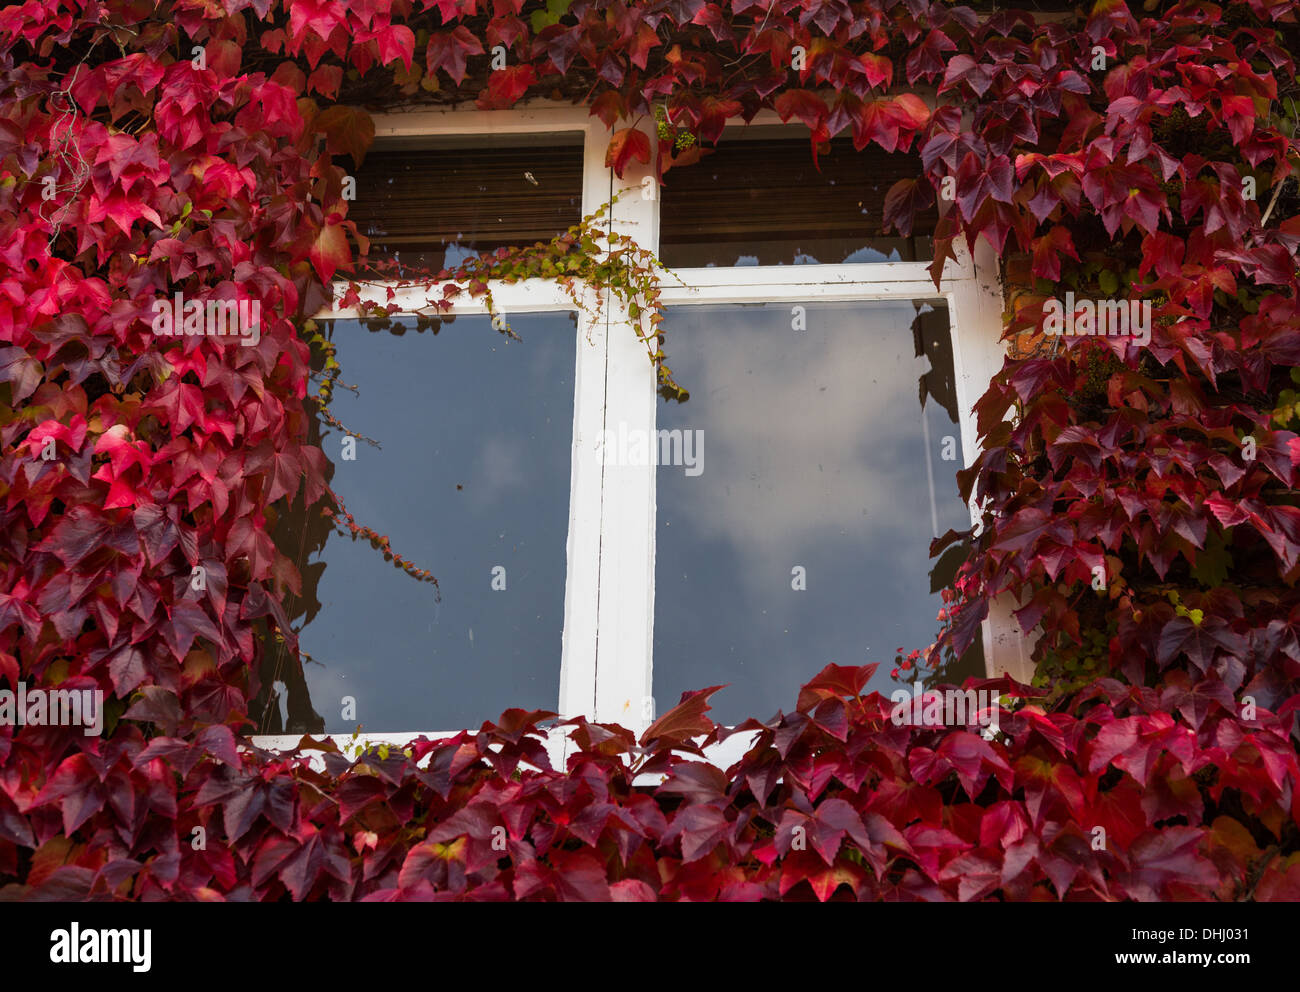 Growth of red and green ivy leaves surrounding a window Stock Photo